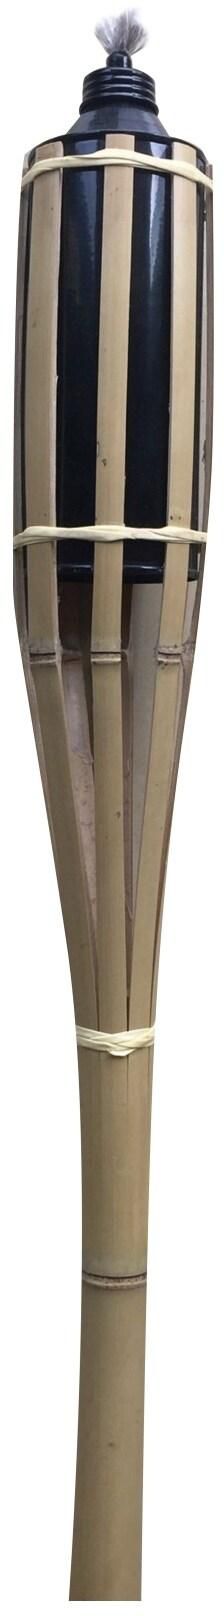 Paradiso Bamboo Torch Beige 150cm